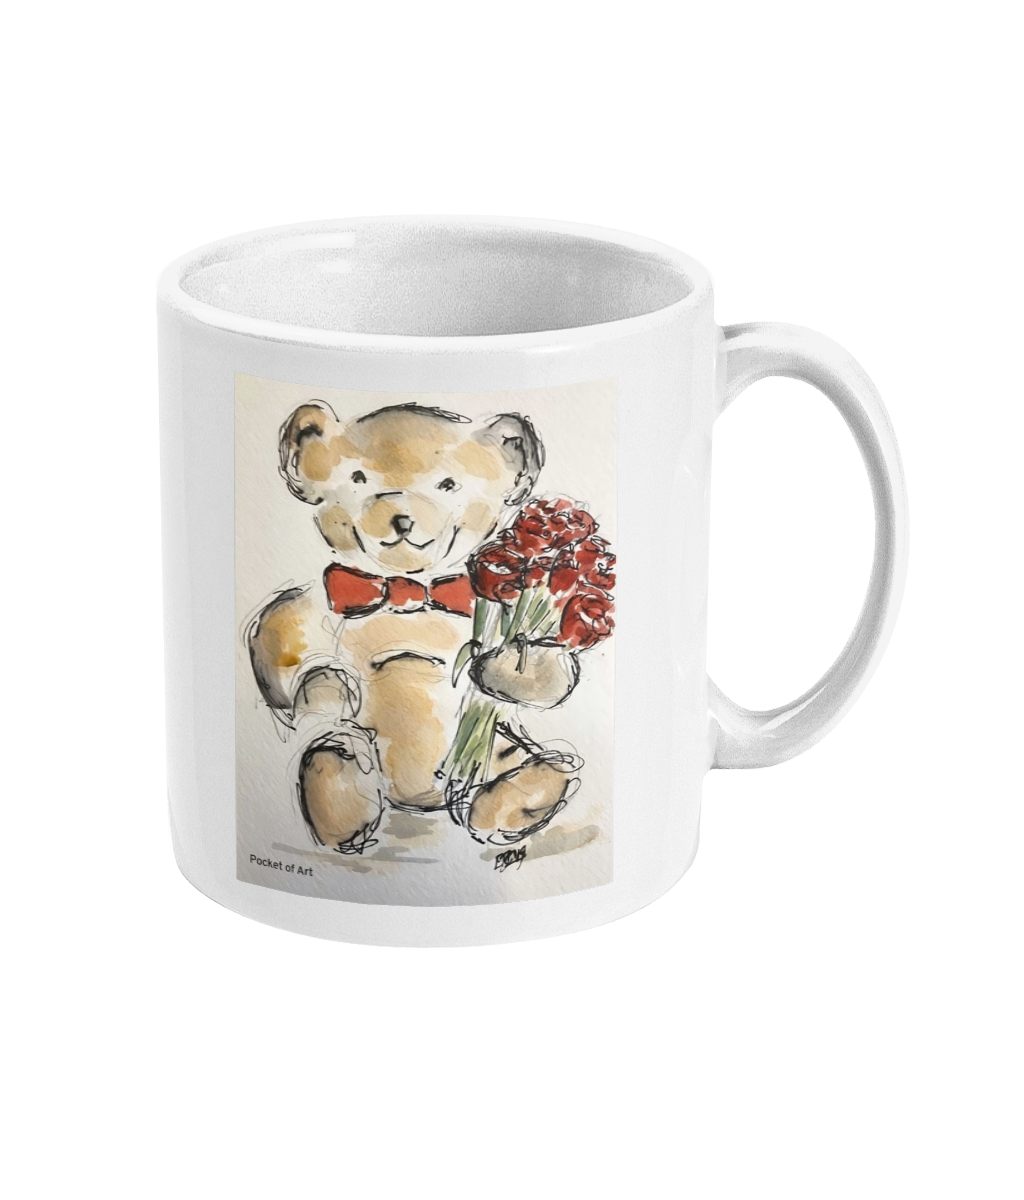 Mug with Teddy and Roses